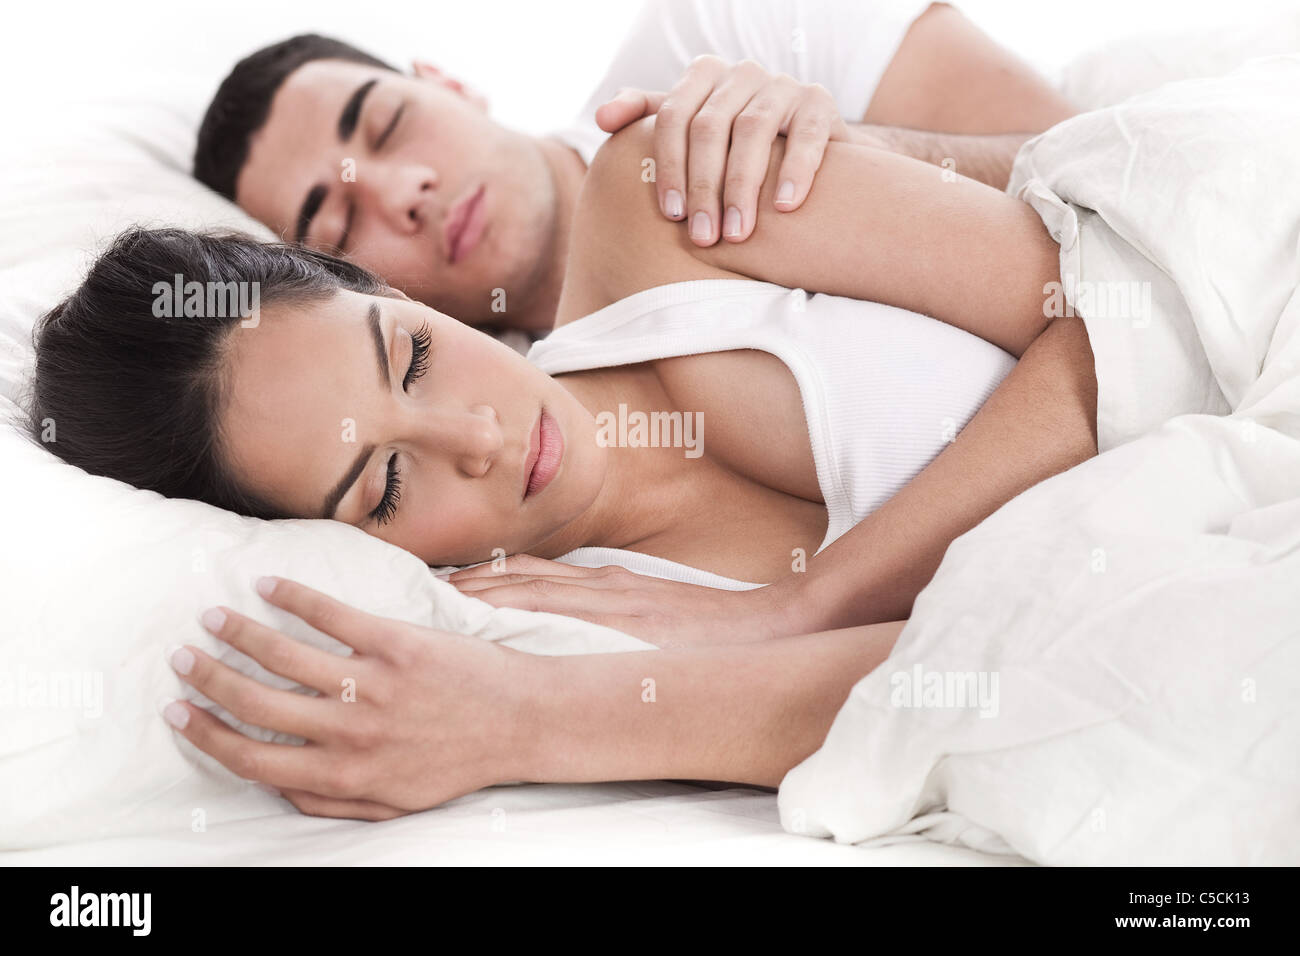 Couple lying in bed sleeping together over white background Stock Photo